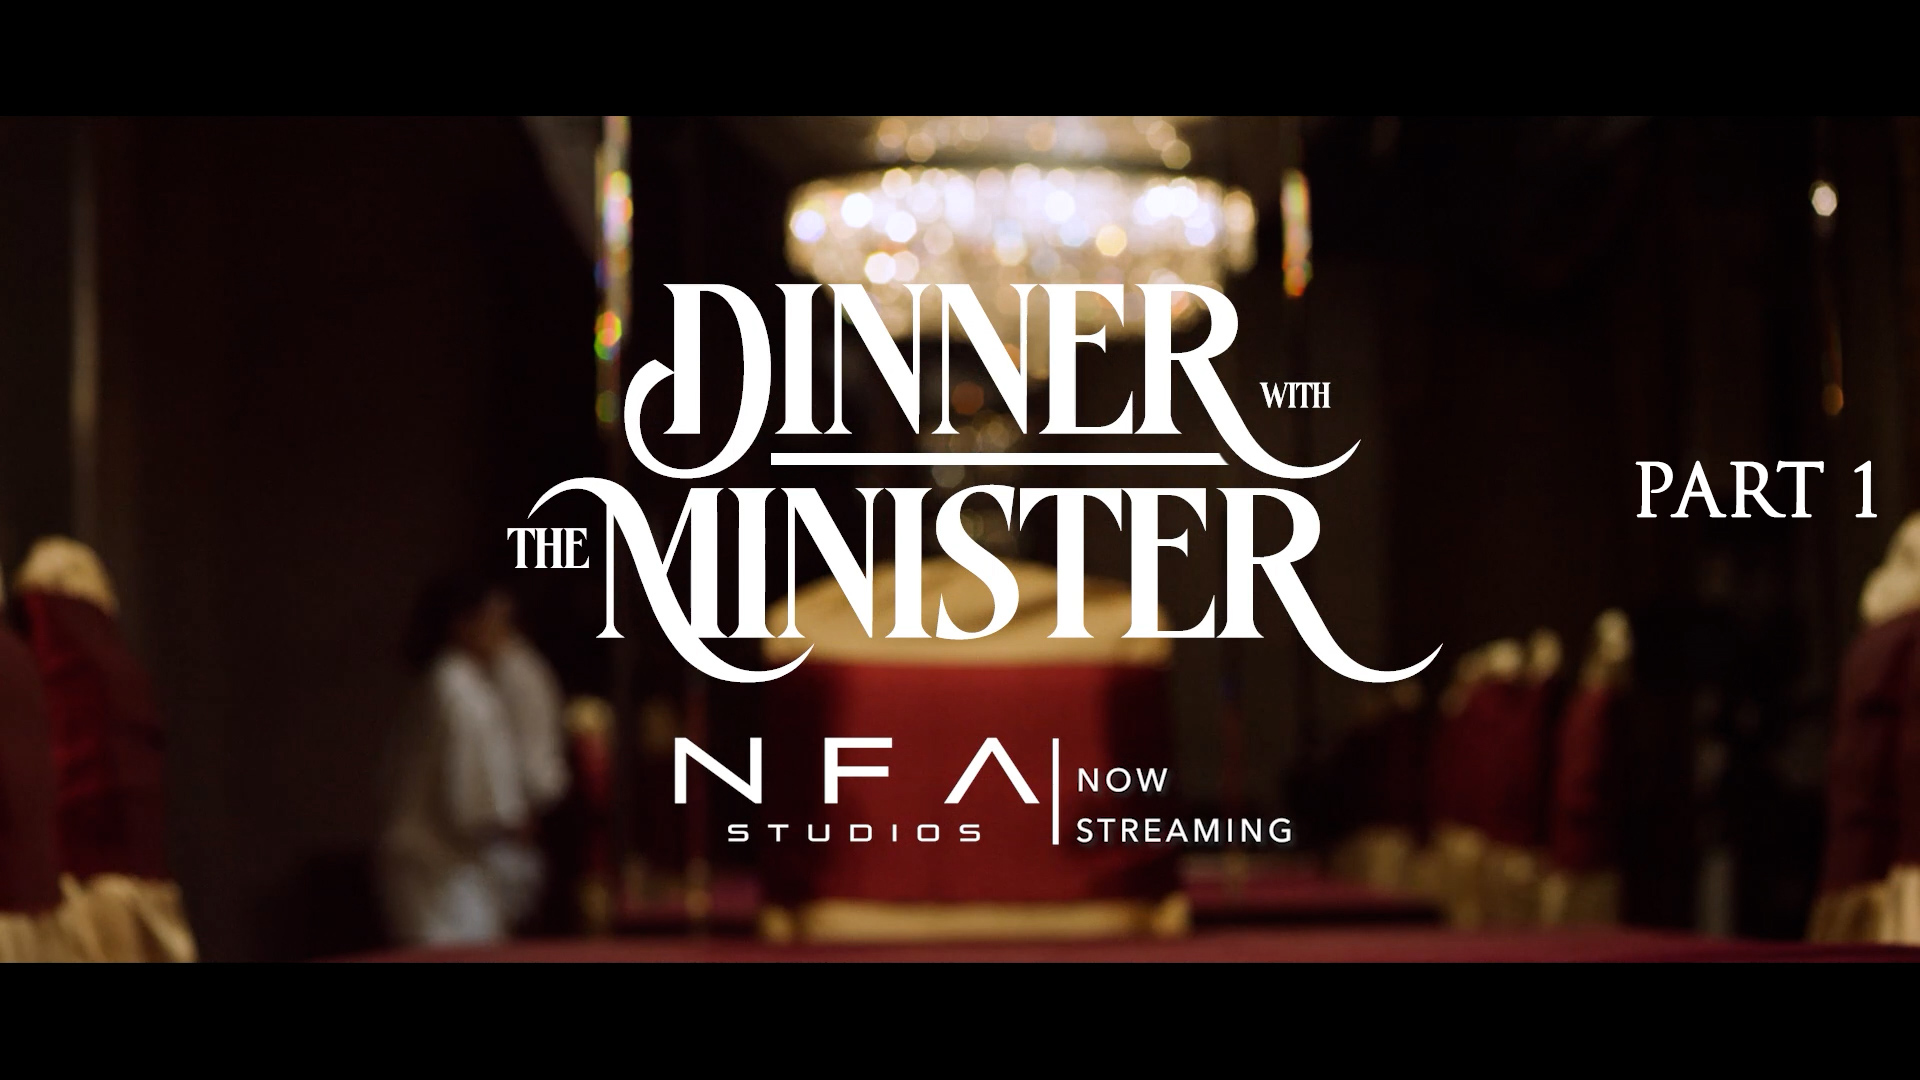 Dinner With The Minister (NFA Studios)